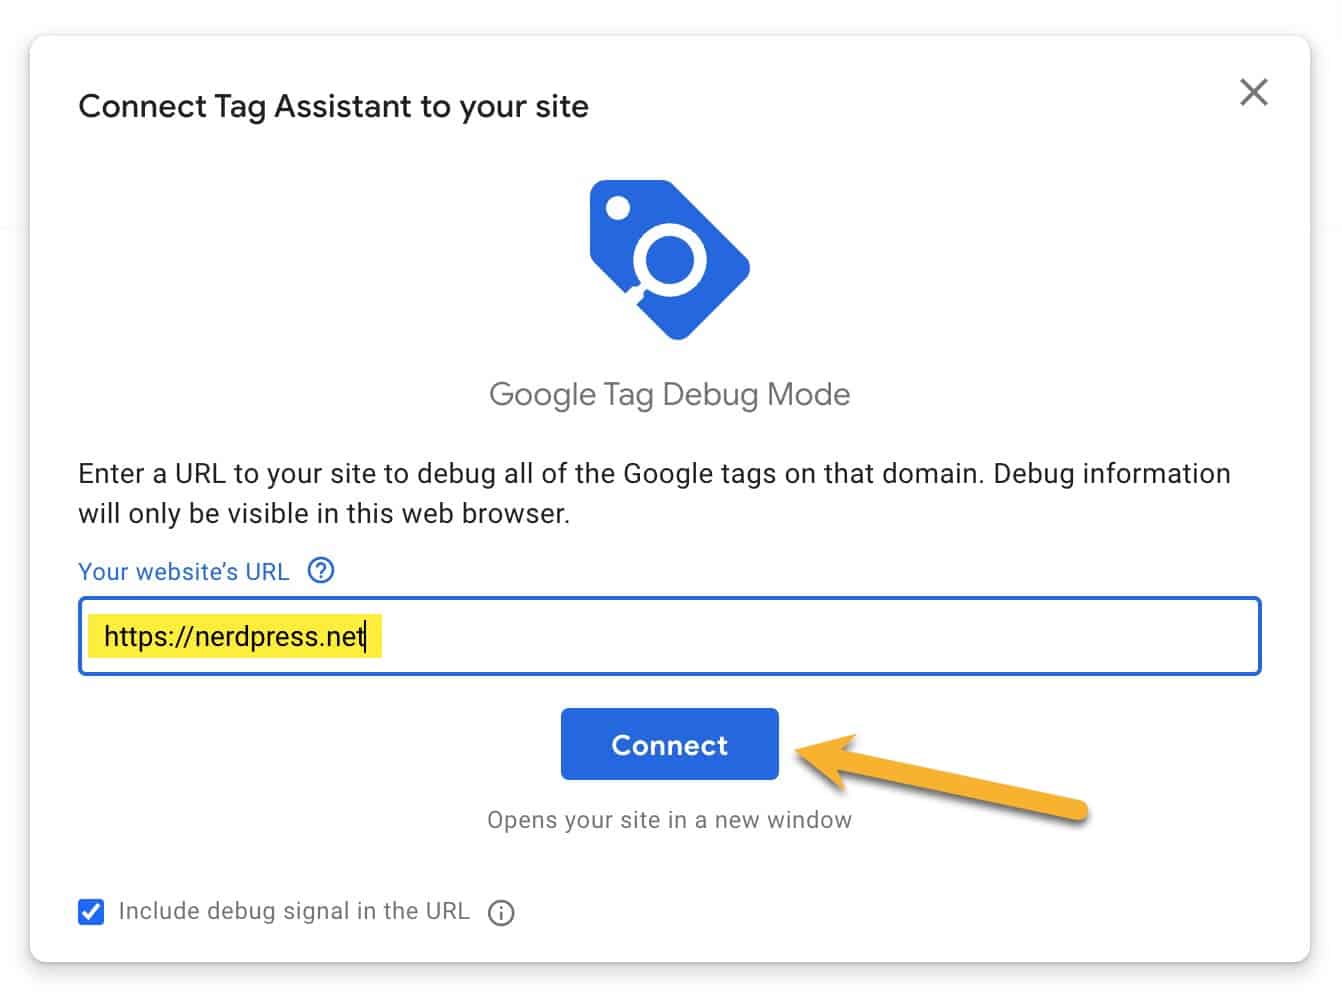 Google Tag Assistant popup window where you enter your website's URL to connect it to tag assistant.